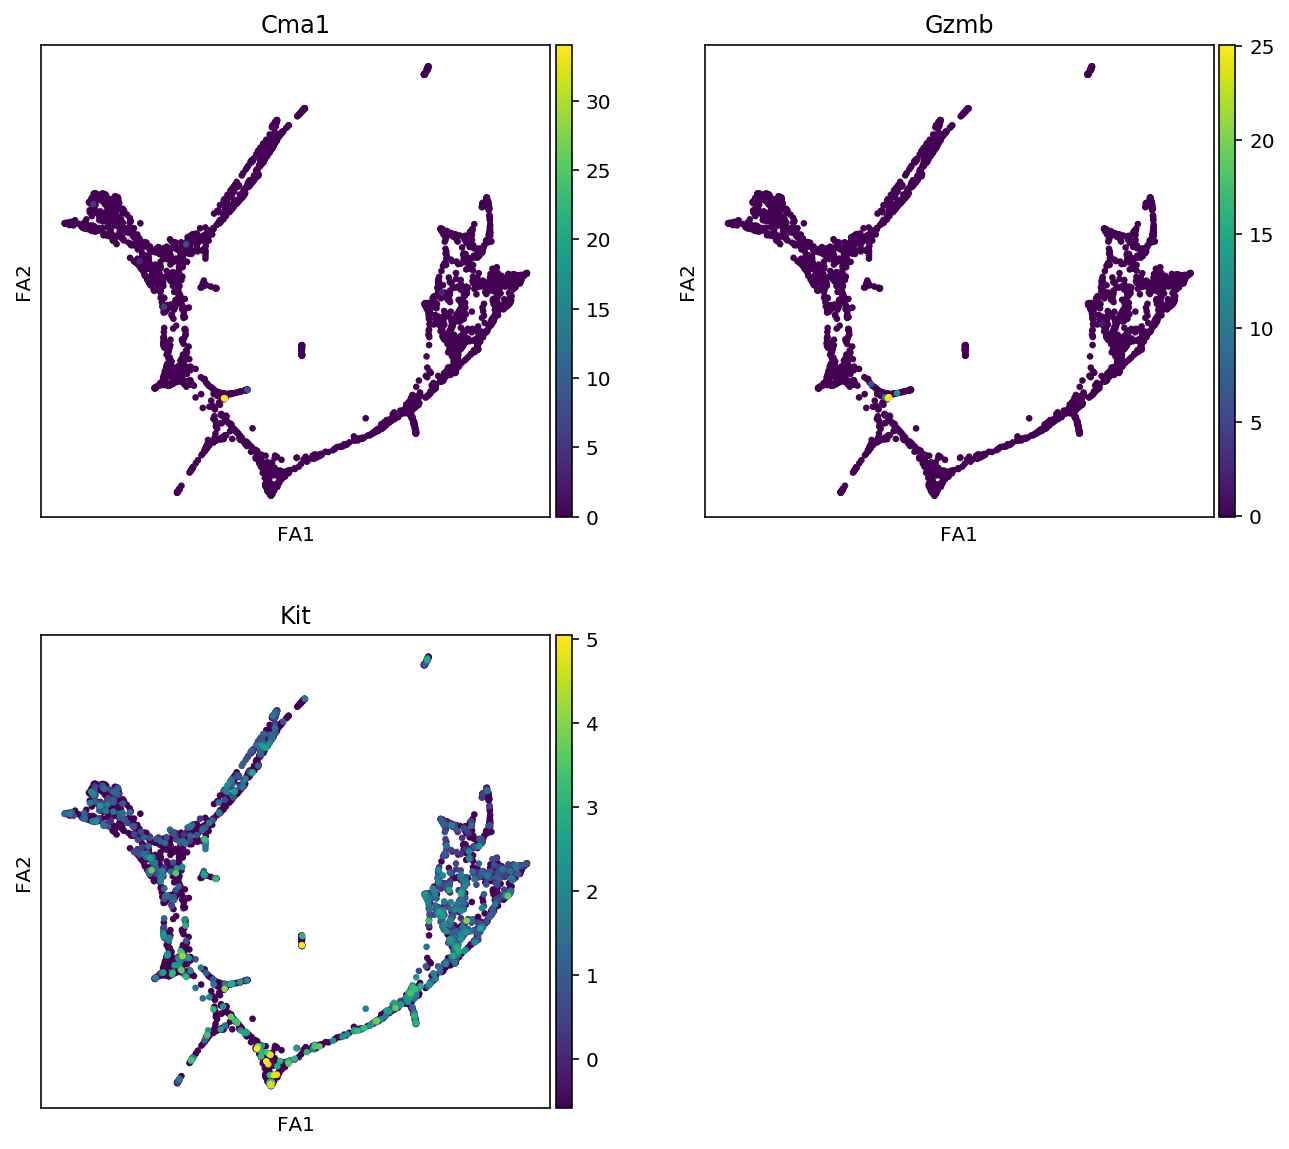 ../../_images/notebooks_03_scRNA-seq_data_preprocessing_scanpy_preprocessing_with_Paul_etal_2015_data_26_4.png